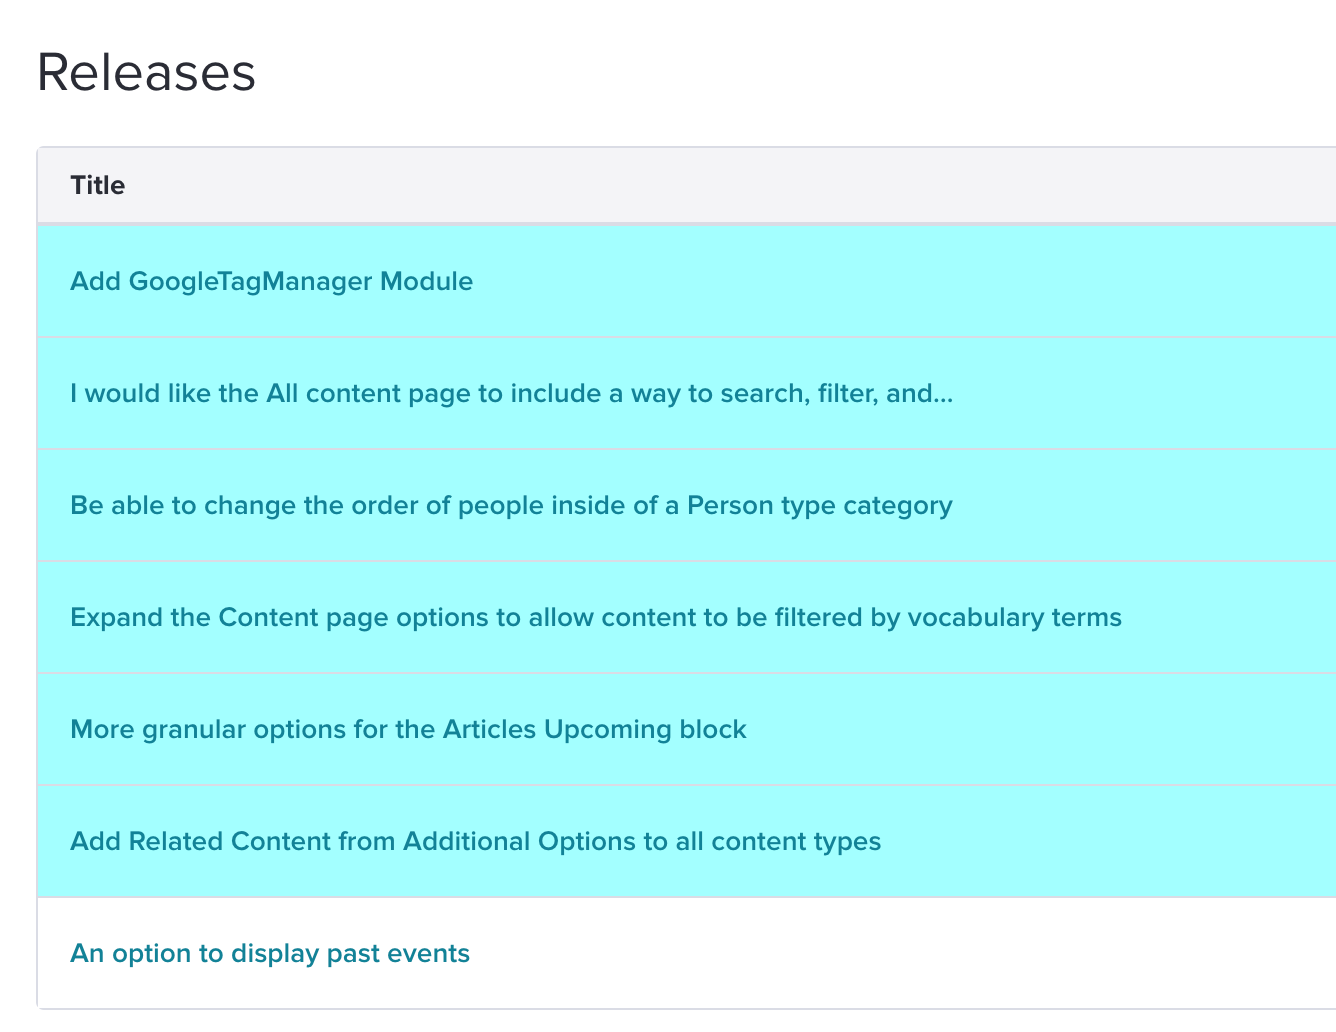 List of completed feature requests in the Releases page.